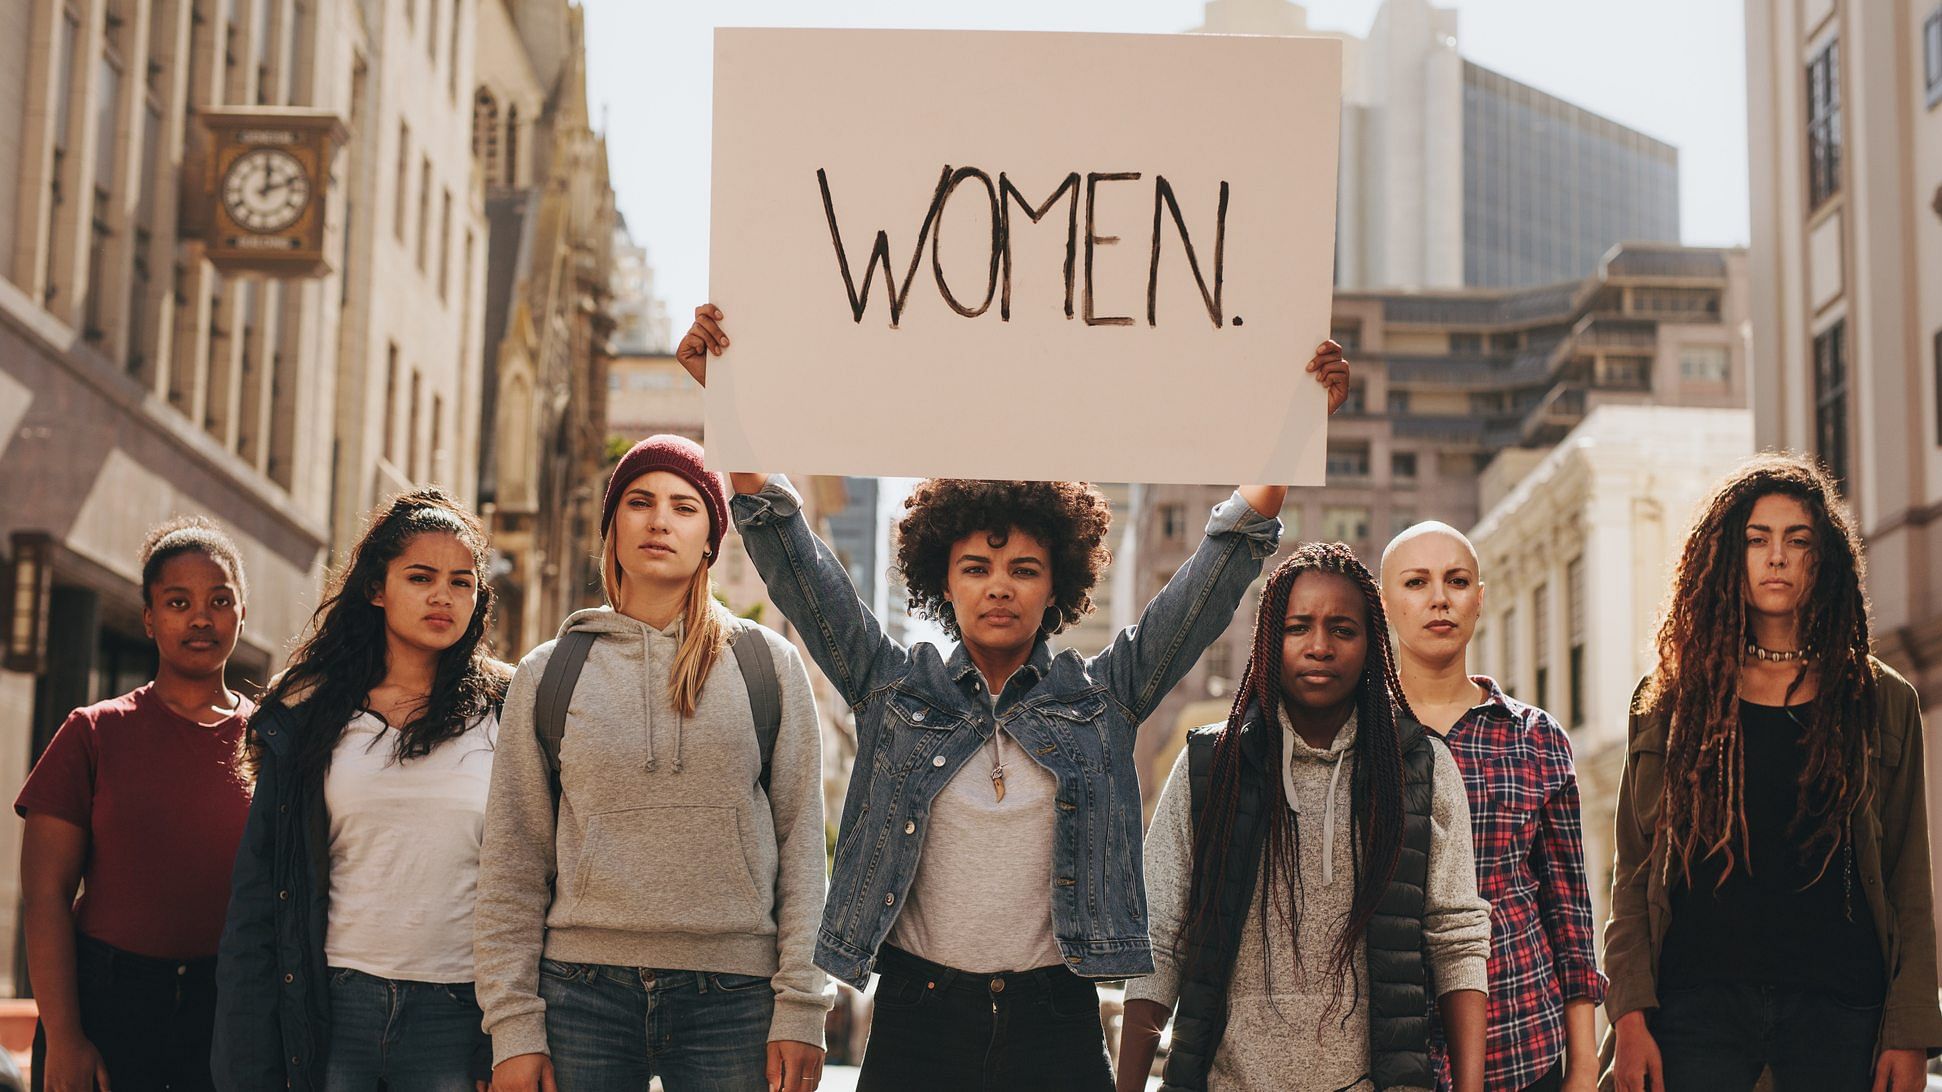 On the one hand, contemporarily, we have decisions and pledges taken increasingly by academics and activists that they will not be part of panels, committees, and organisations that do not include women, and on the other, we have narratives and discourses that are unabashedly gender insensitive, if not misogynistic. Credit: iStock Photo